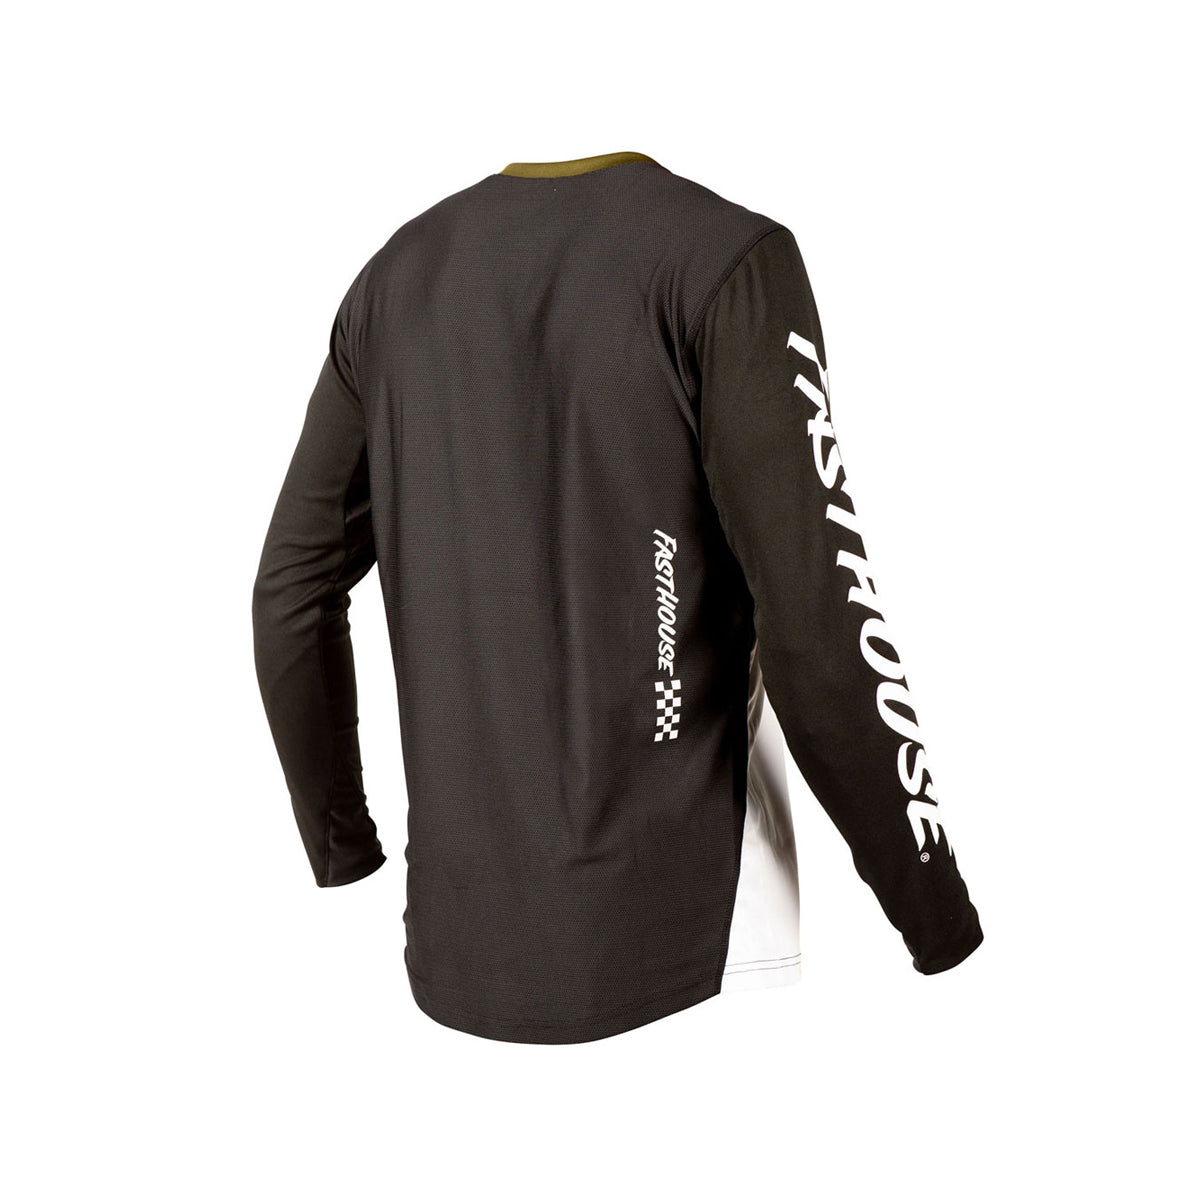 Alloy Kilo LS Youth Jersey - Olive/White – Fasthouse